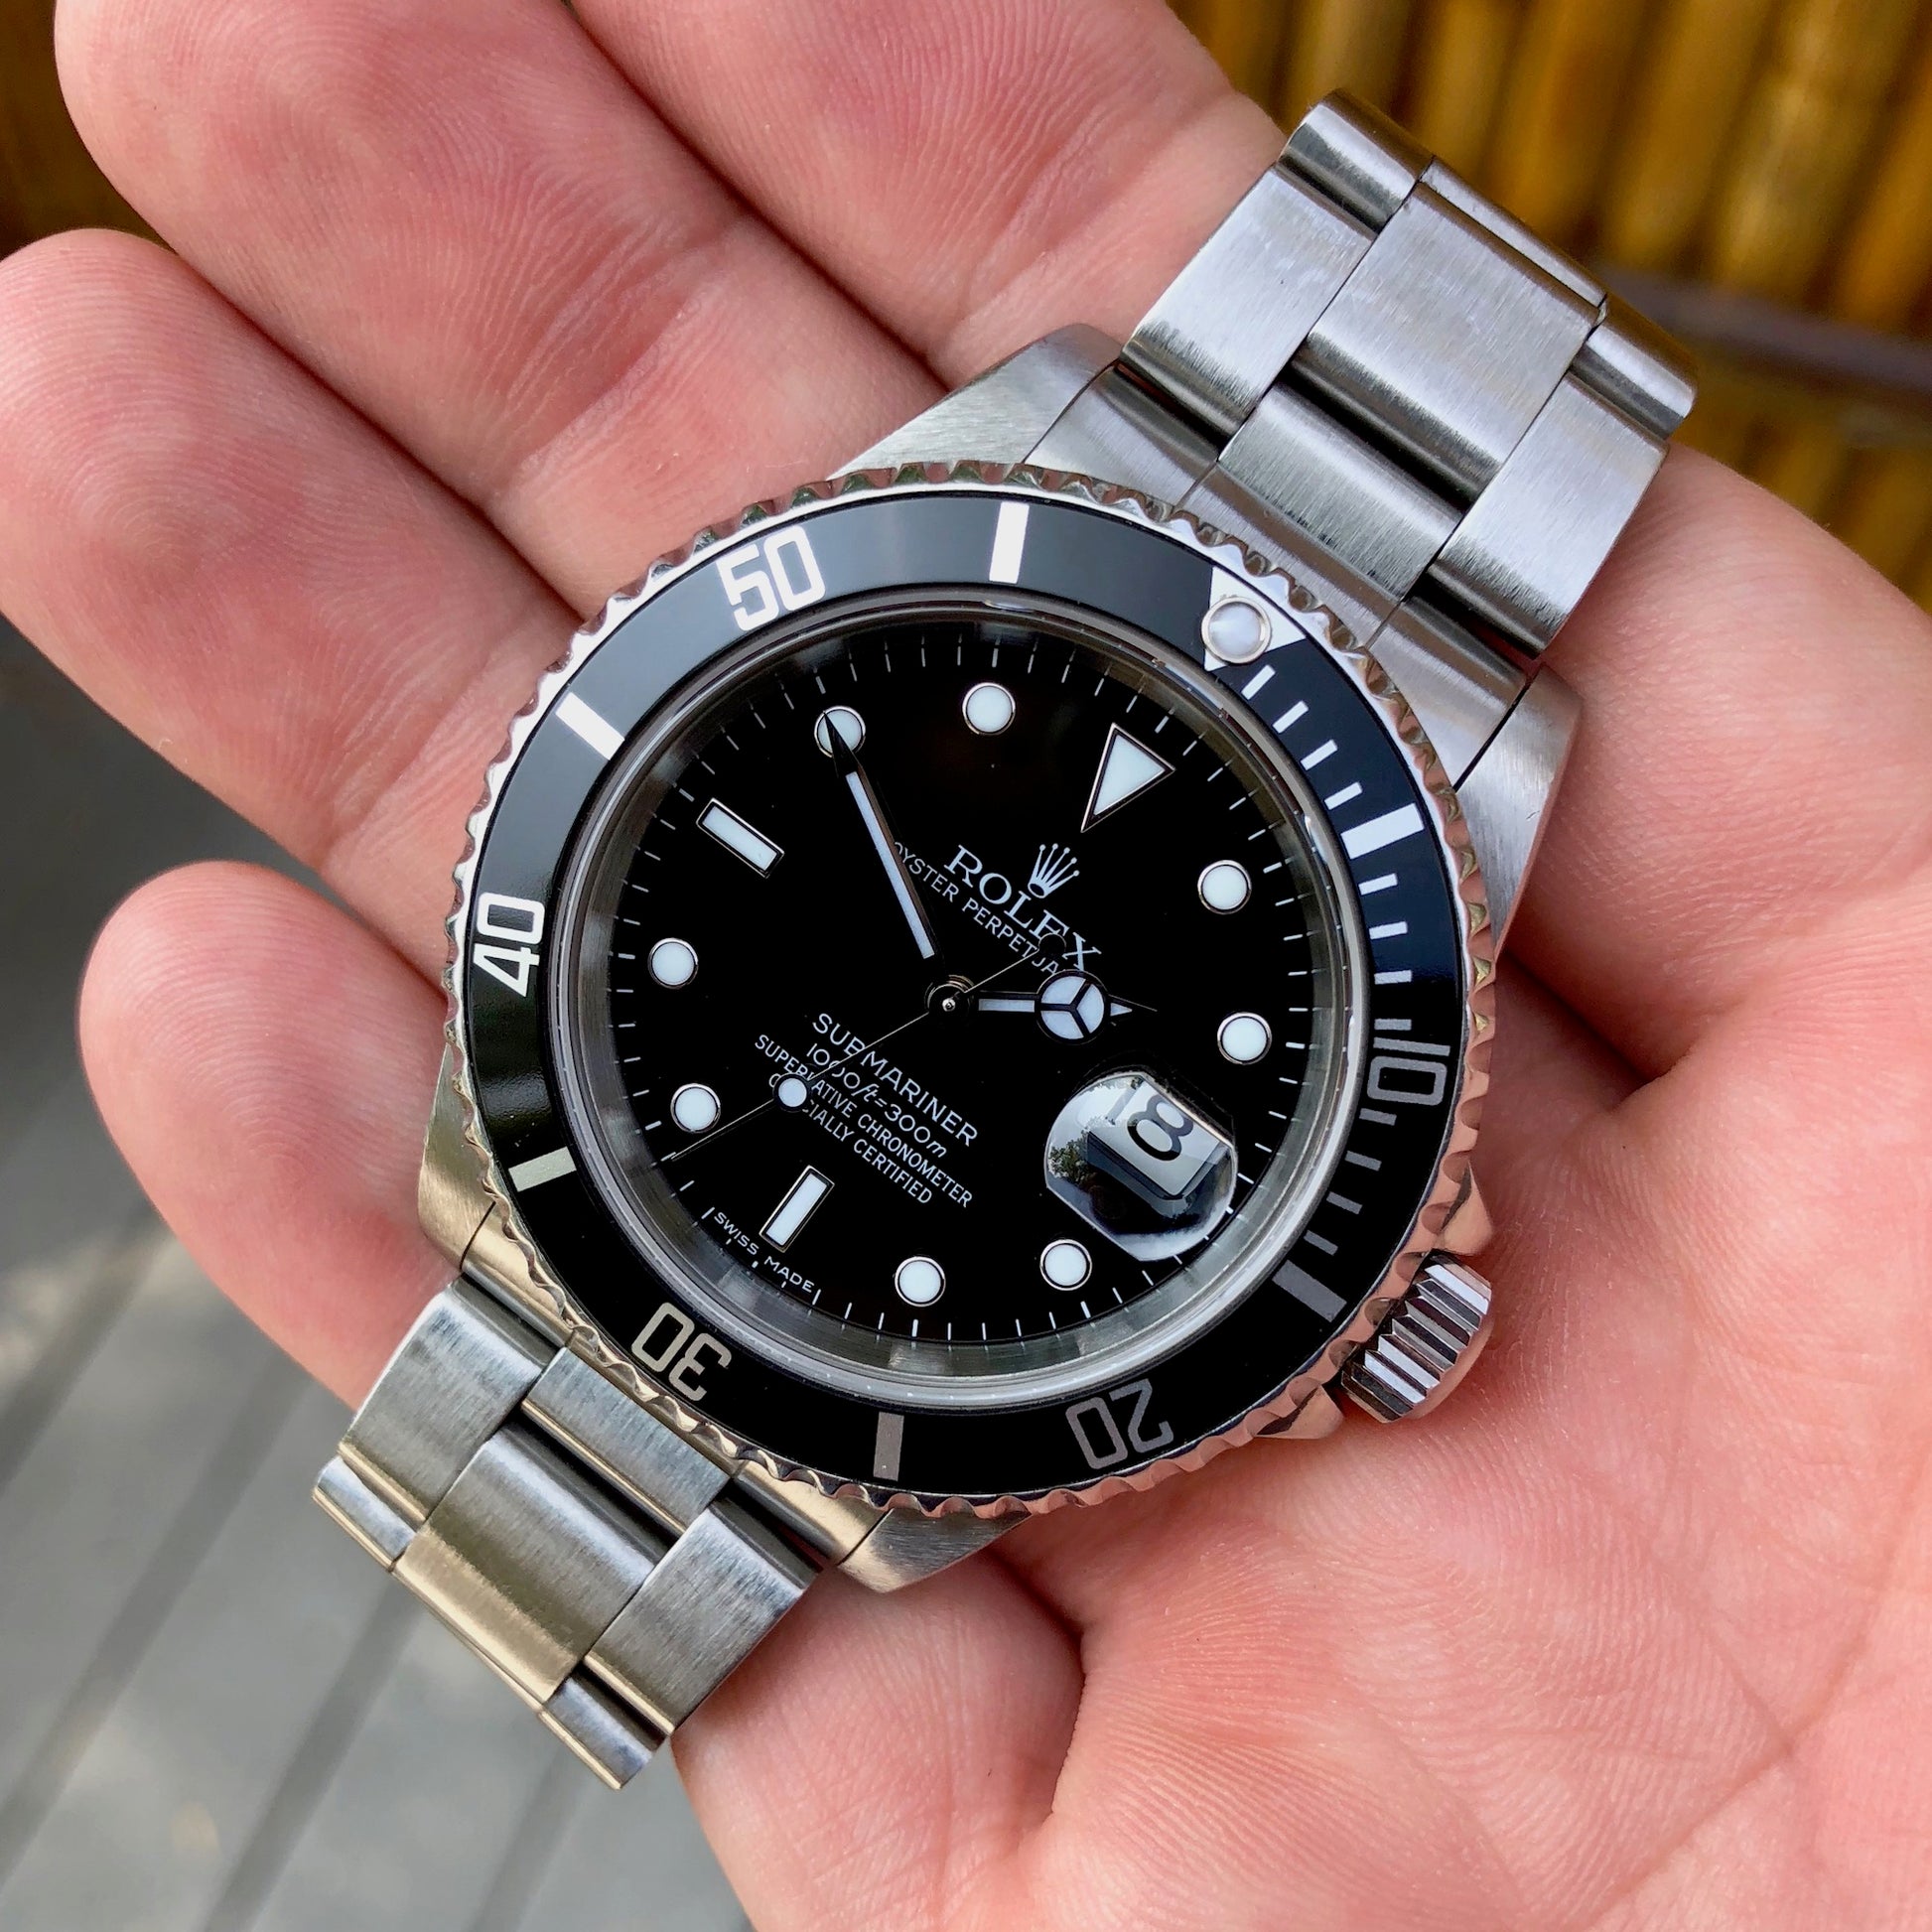 Rolex Submariner 16610 Date Steel Oyster Perpetual Automatic Caliber 3135 Circa 1989 - Hashtag Watch Company